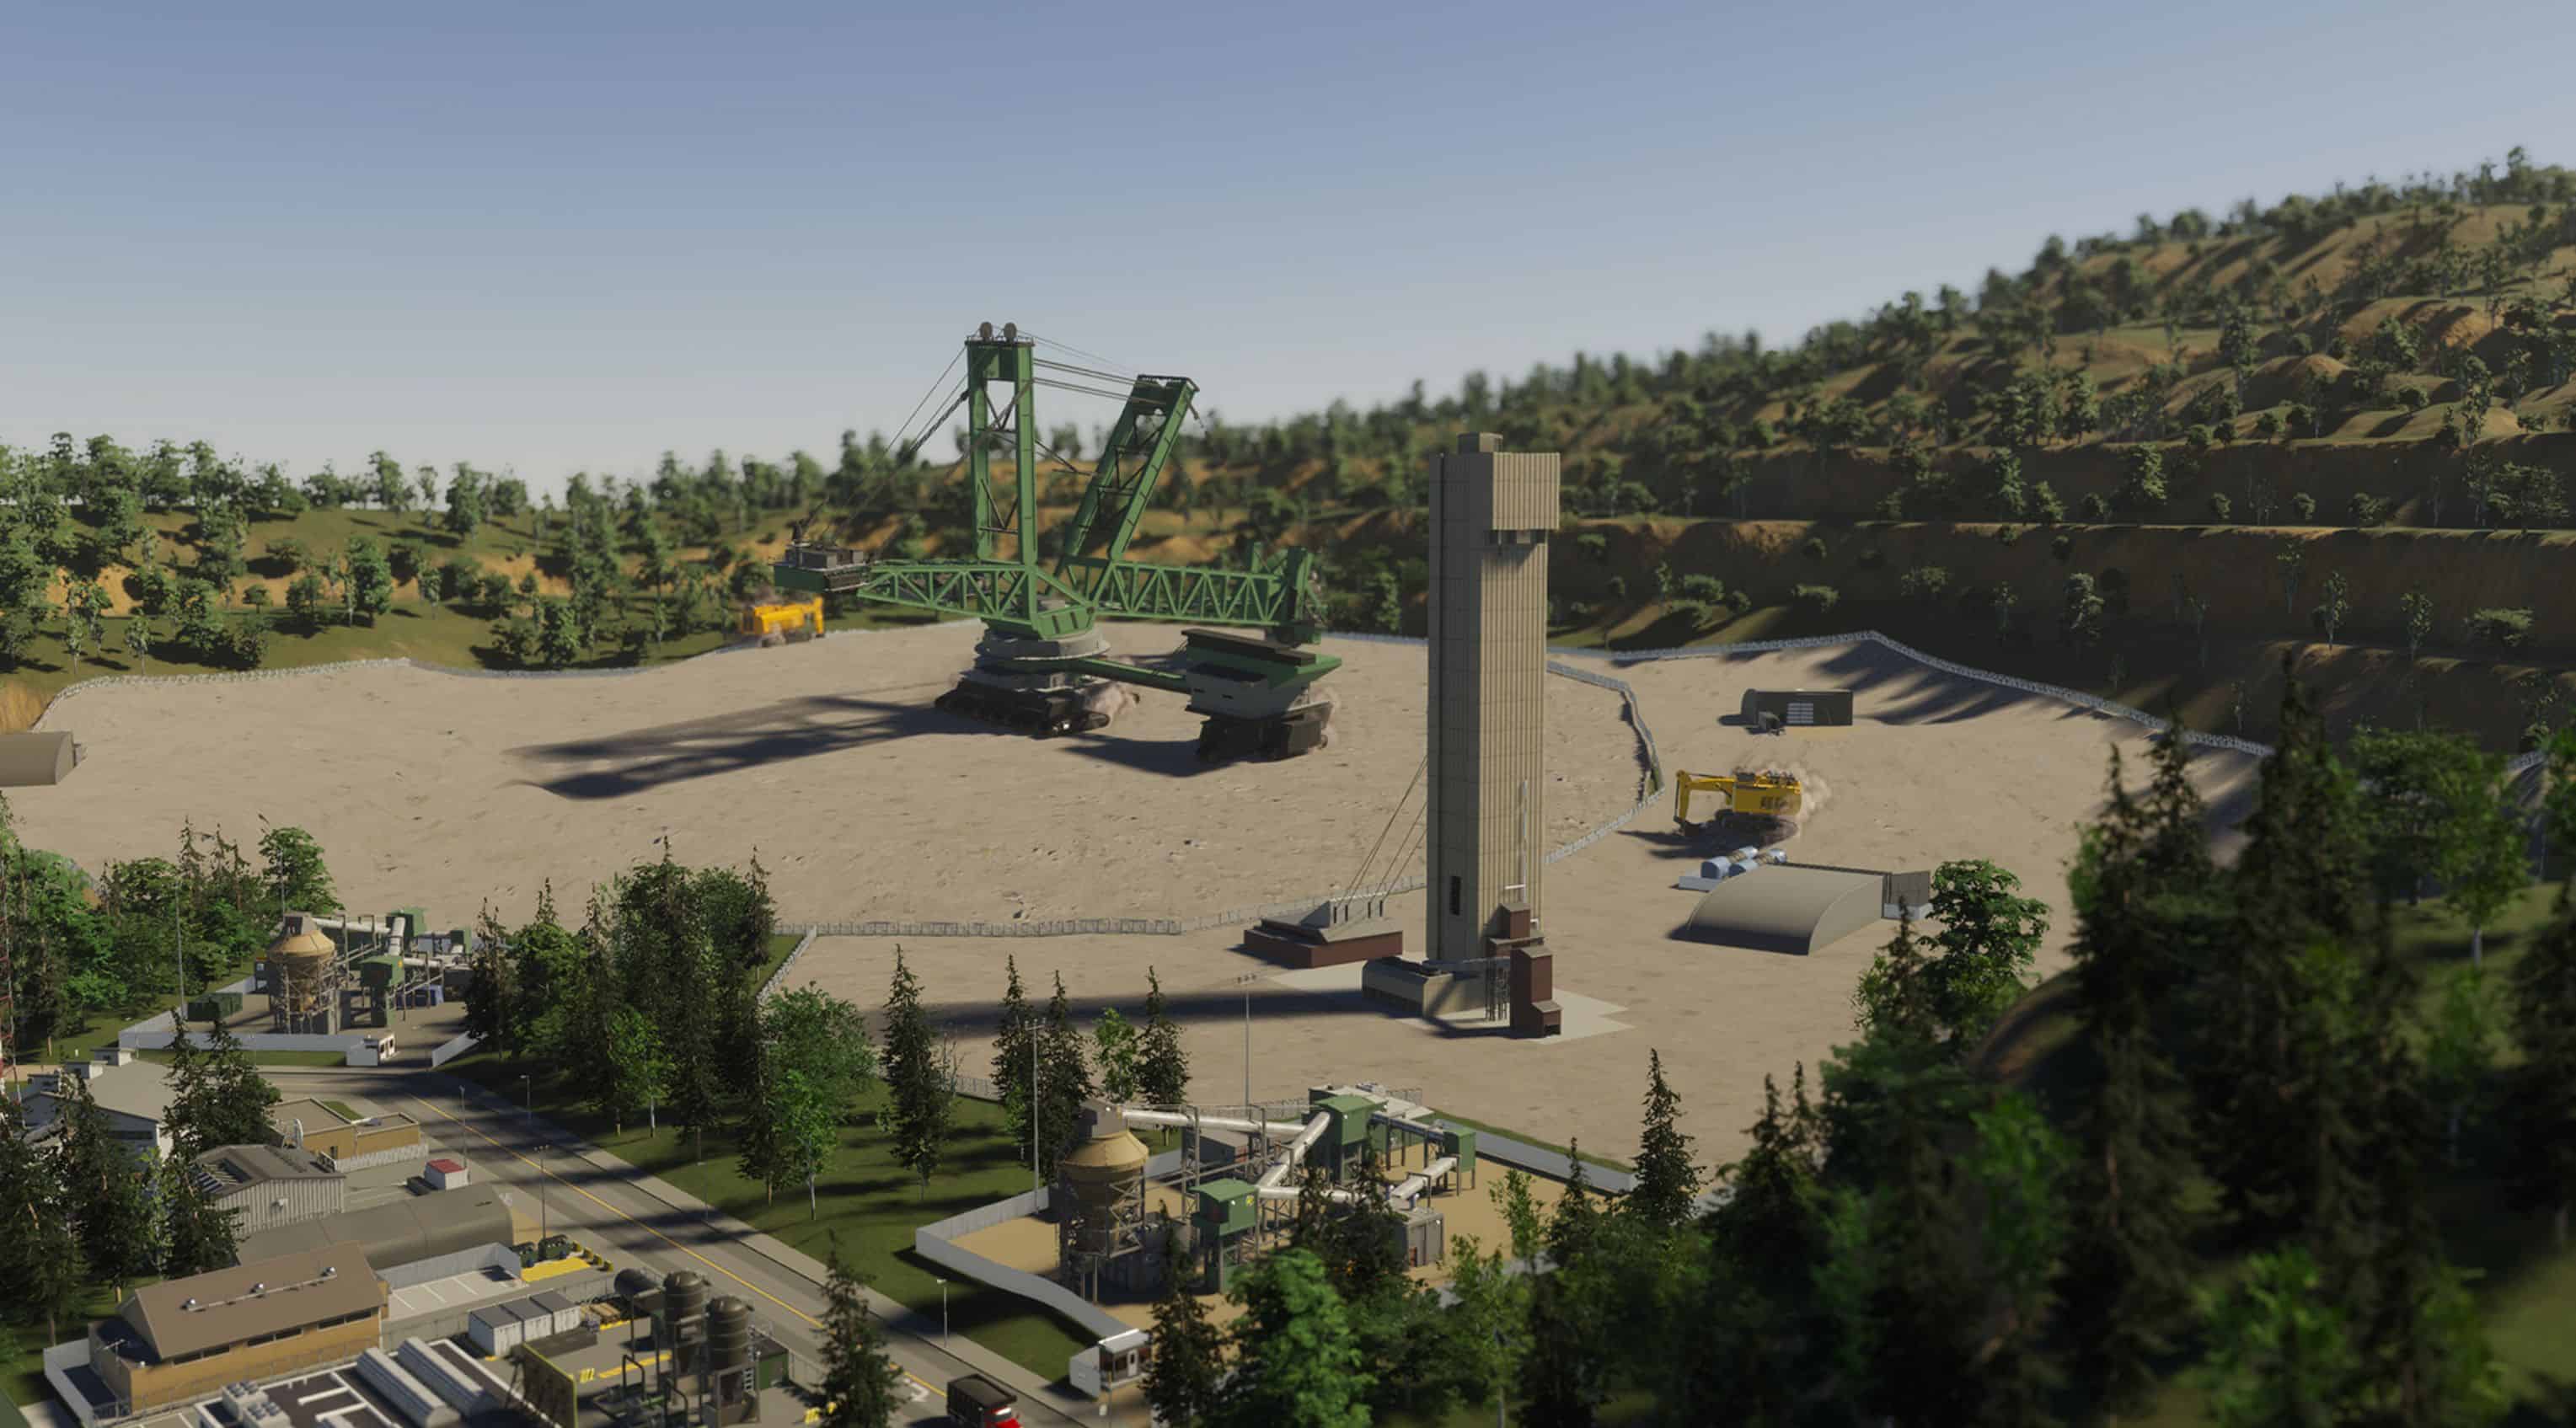 Cities: Skylines 2's editor tools look better than the original's, but they  still don't have a release date